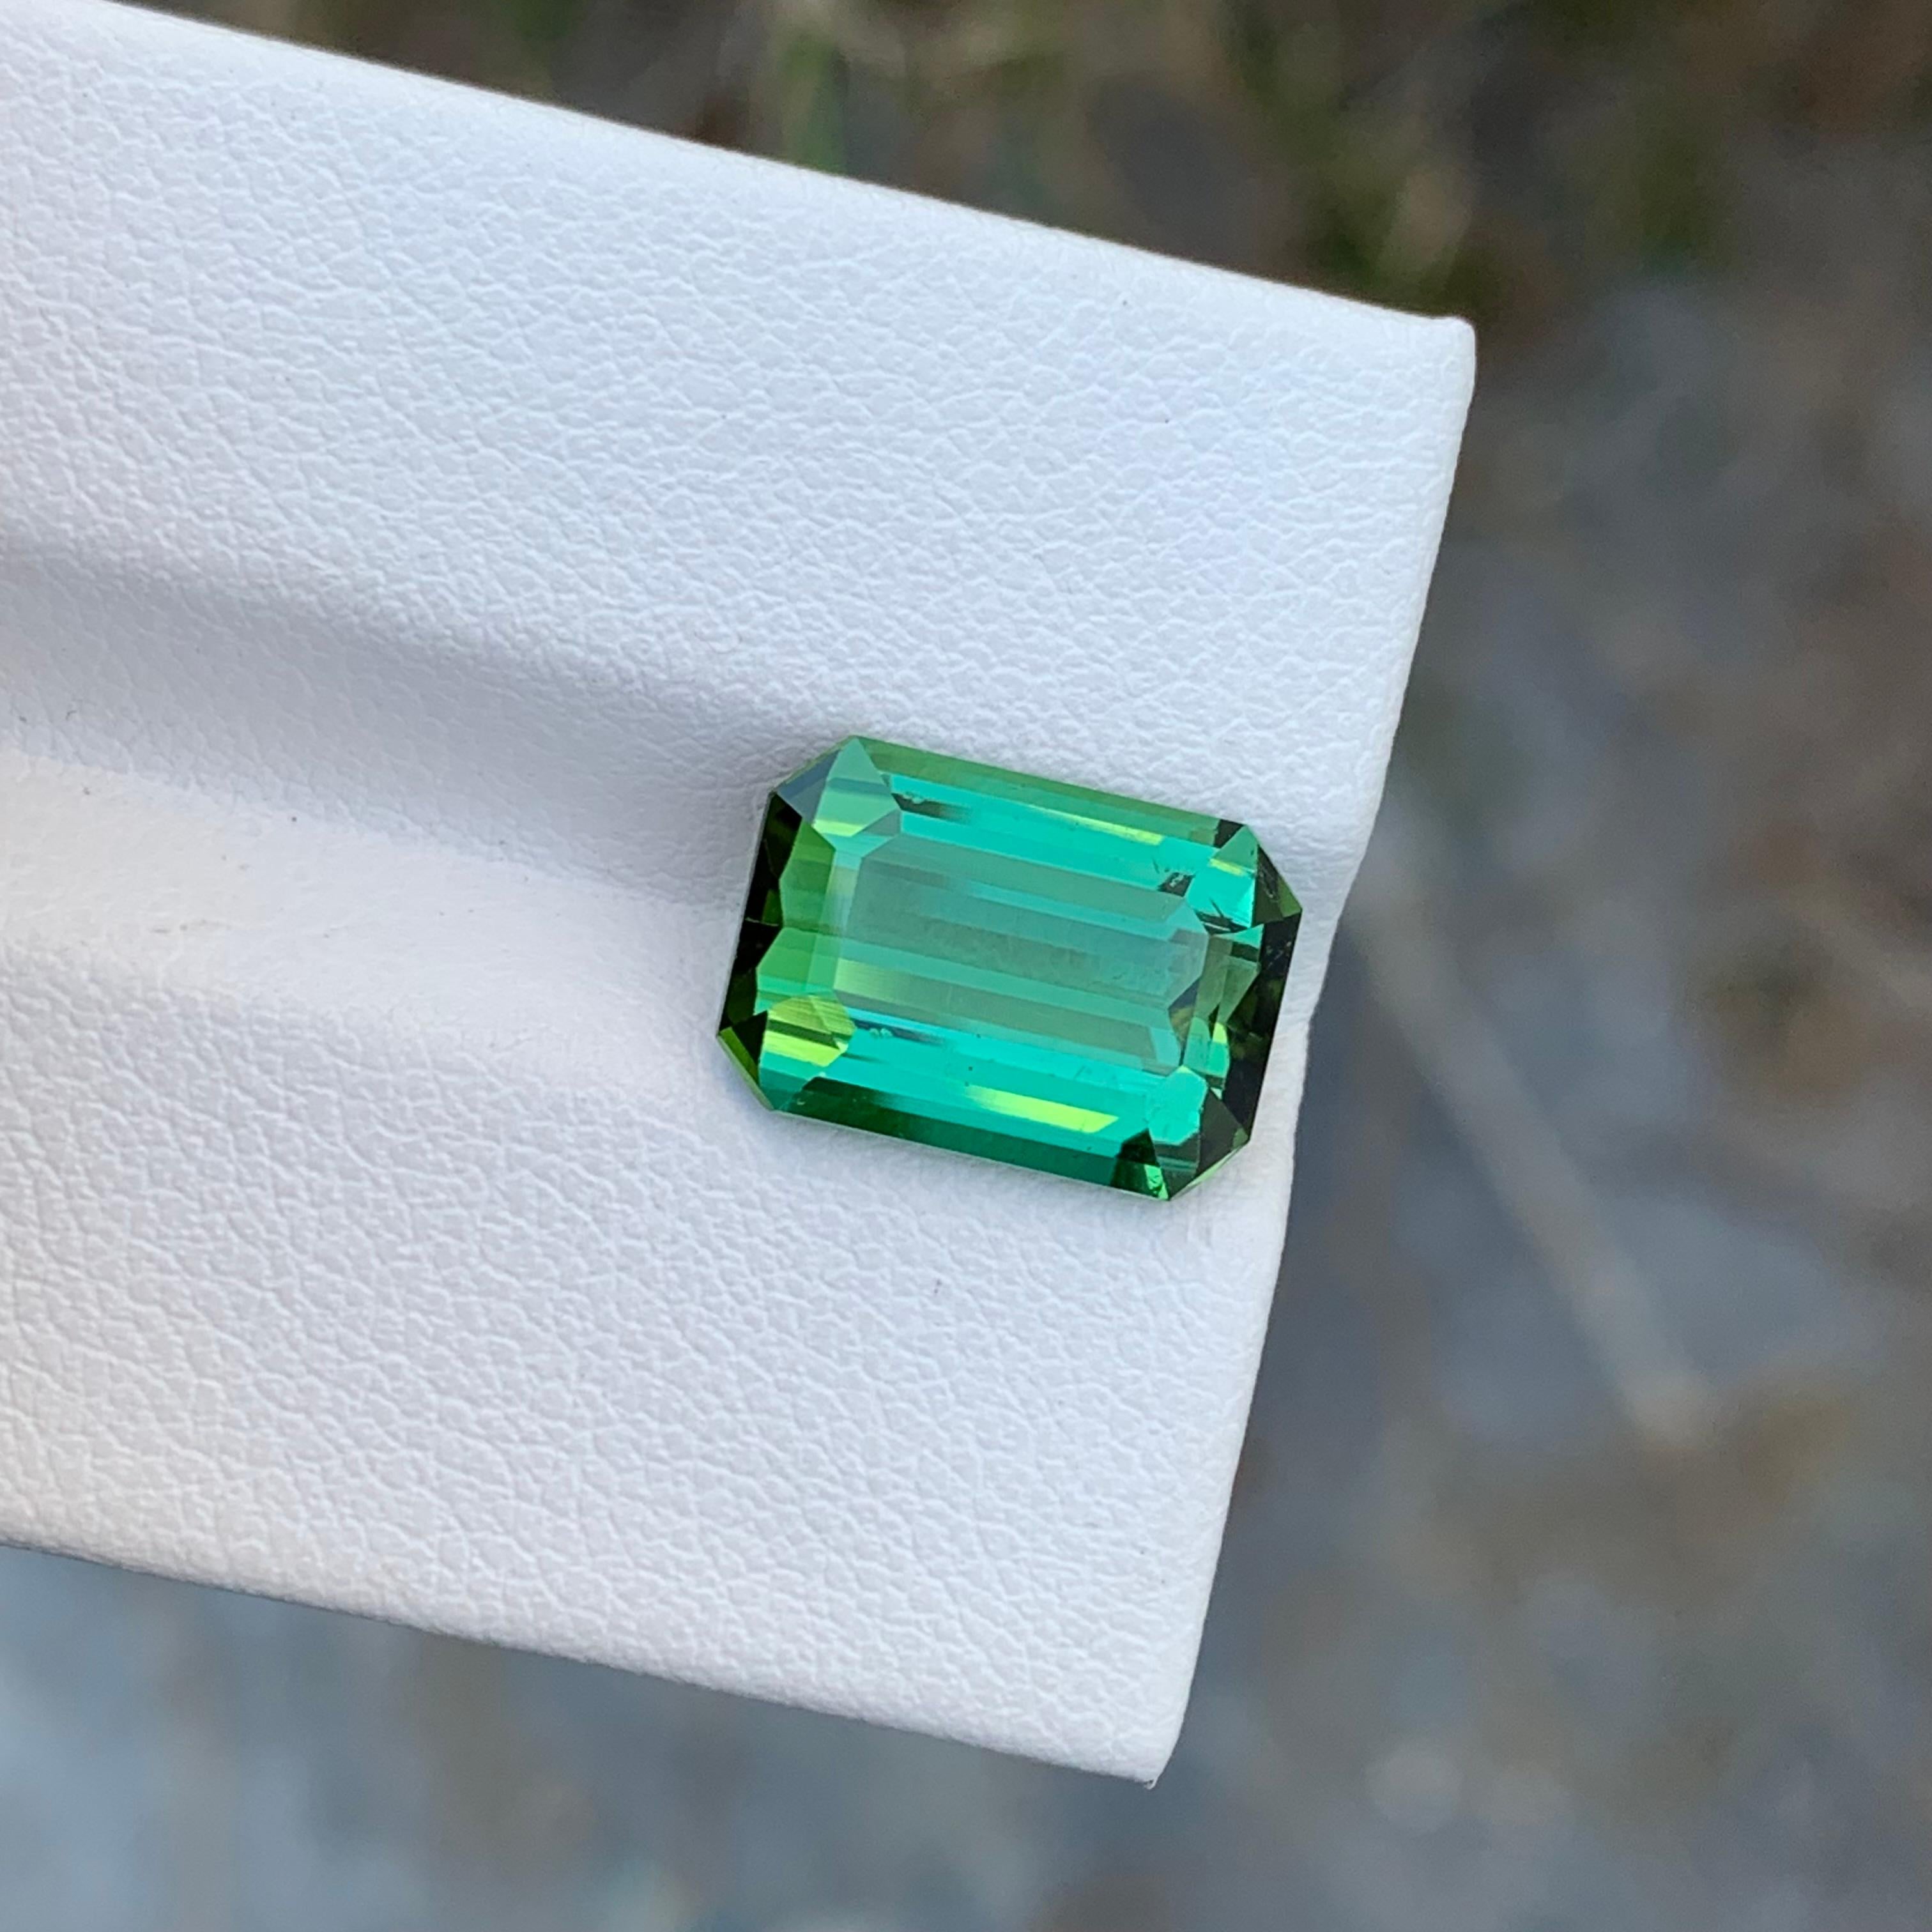 Loose Bright Green Tourmaline

Weight: 5.20 Carats
Dimension: 12.4 x 8.7 x 5.7 Mm
Colour: Green 
Origin: Afghanistan
Certificate: On Demand
Treatment: Non

Tourmaline is a captivating gemstone known for its remarkable variety of colors, making it a